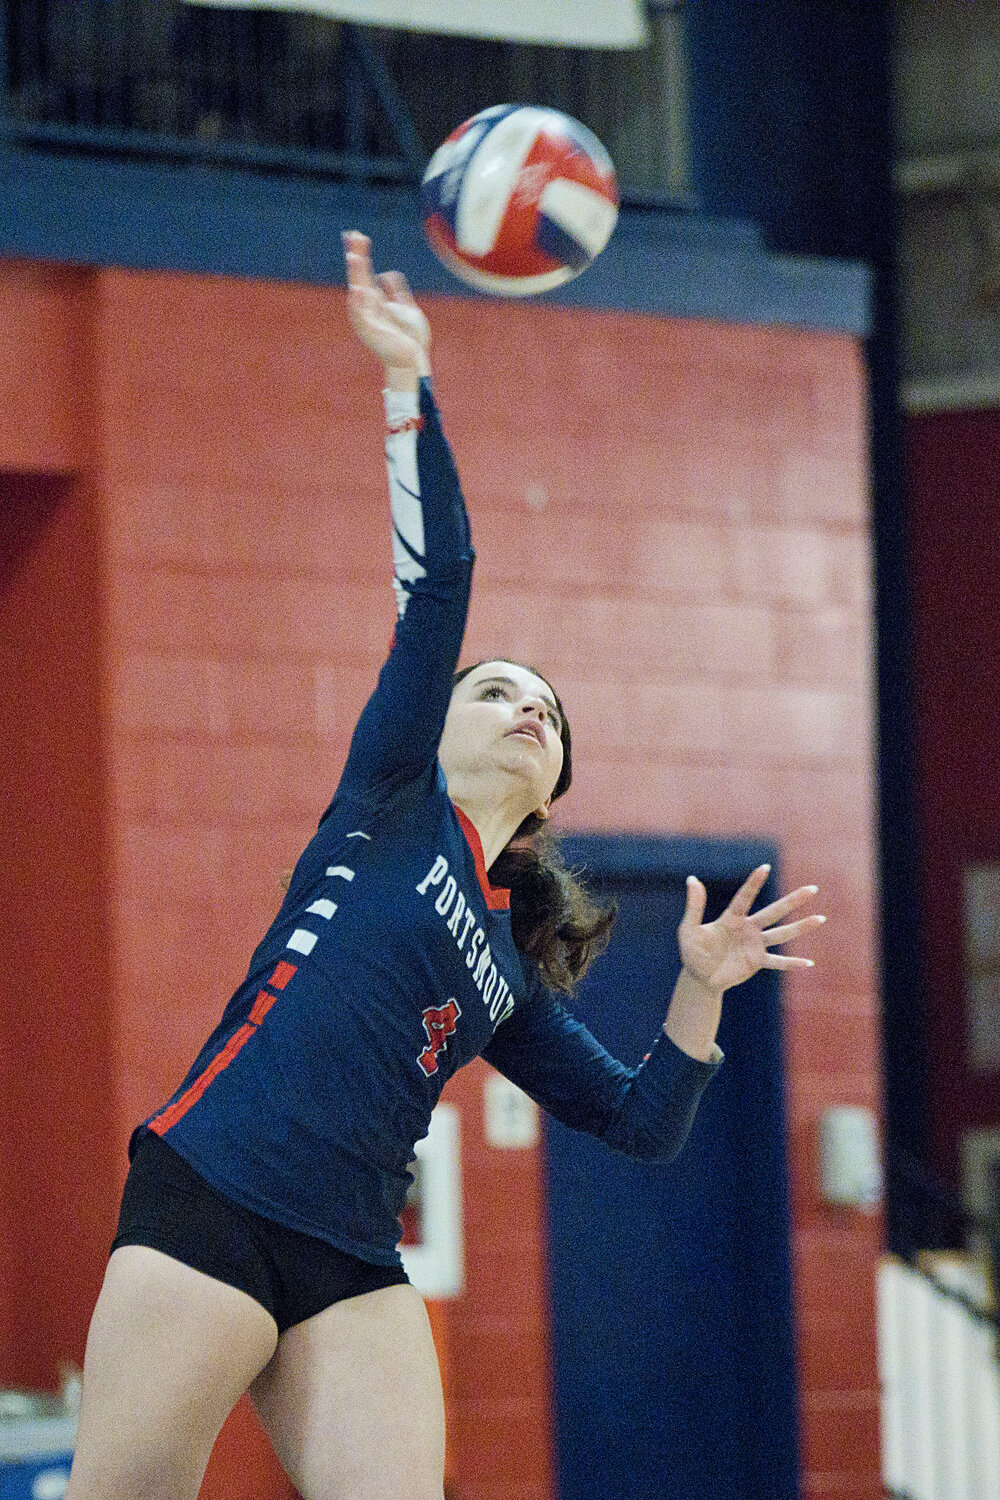 The Patriots’ Maci Krzych serves the ball to the Rams.